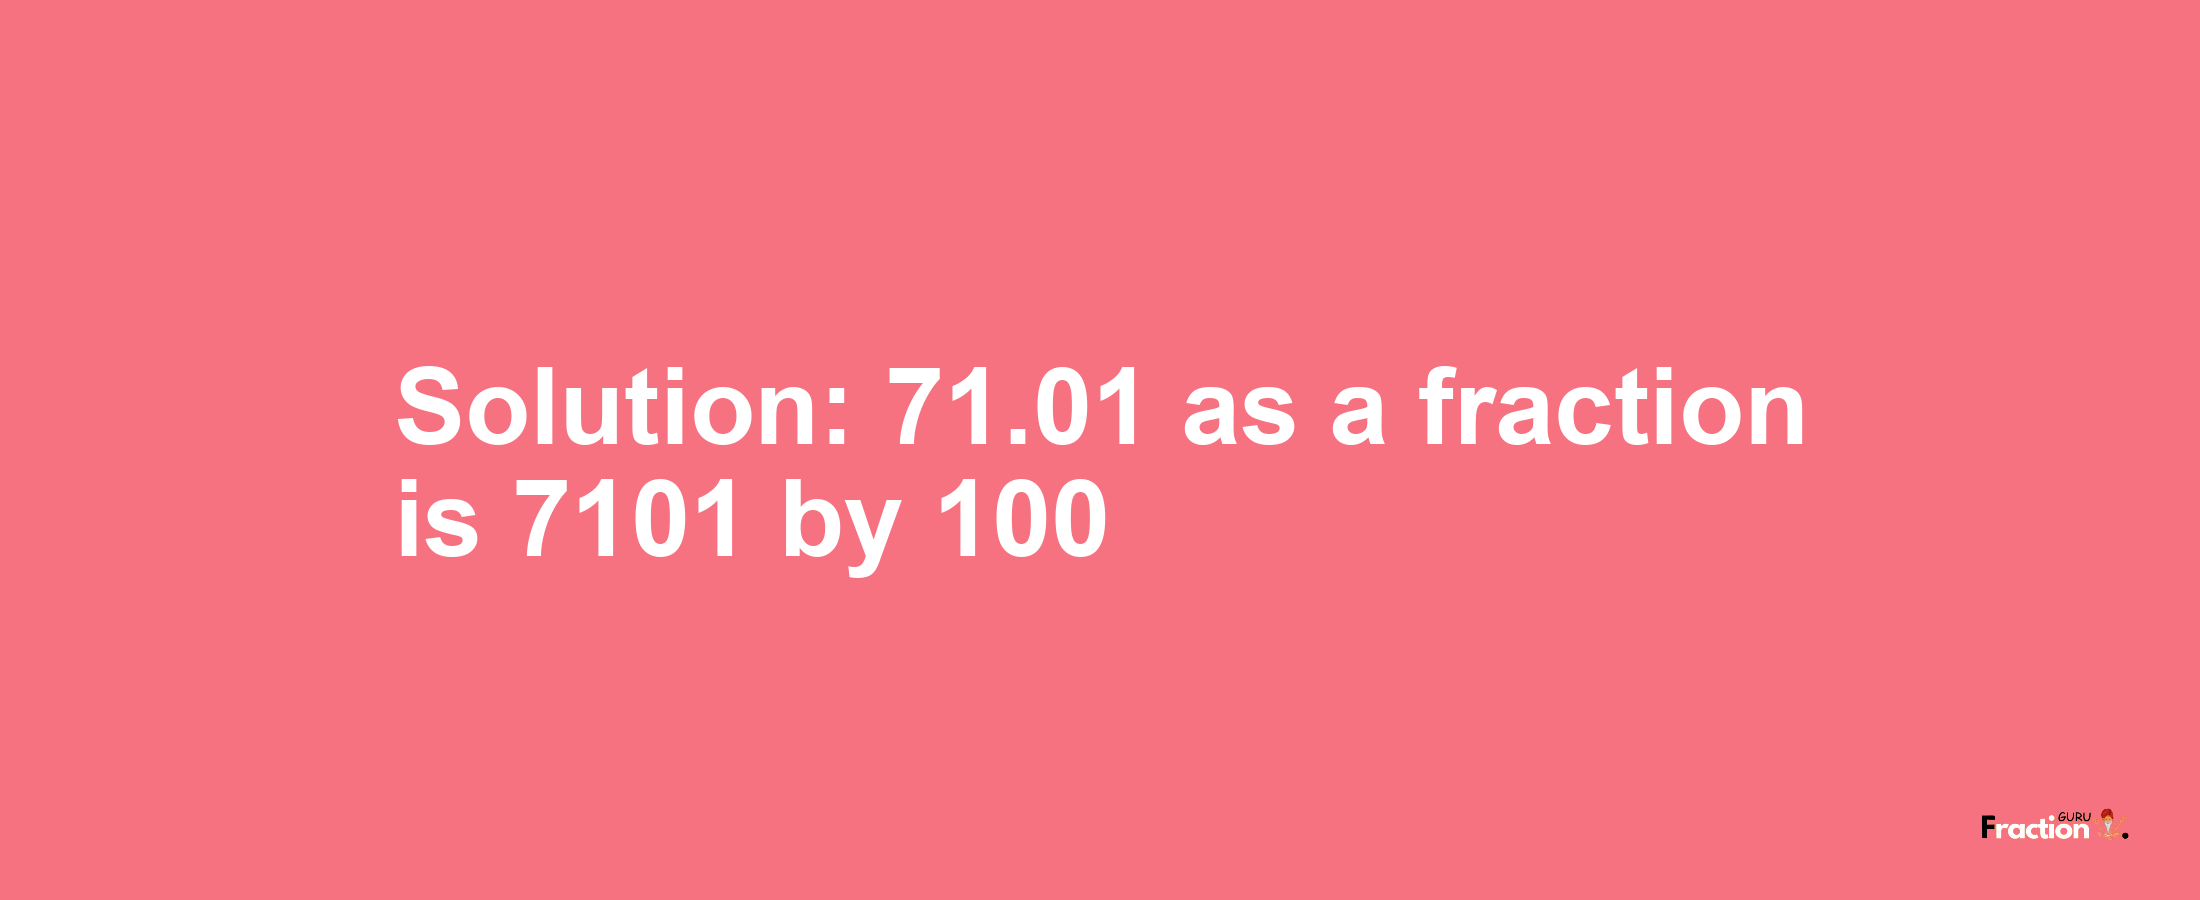 Solution:71.01 as a fraction is 7101/100